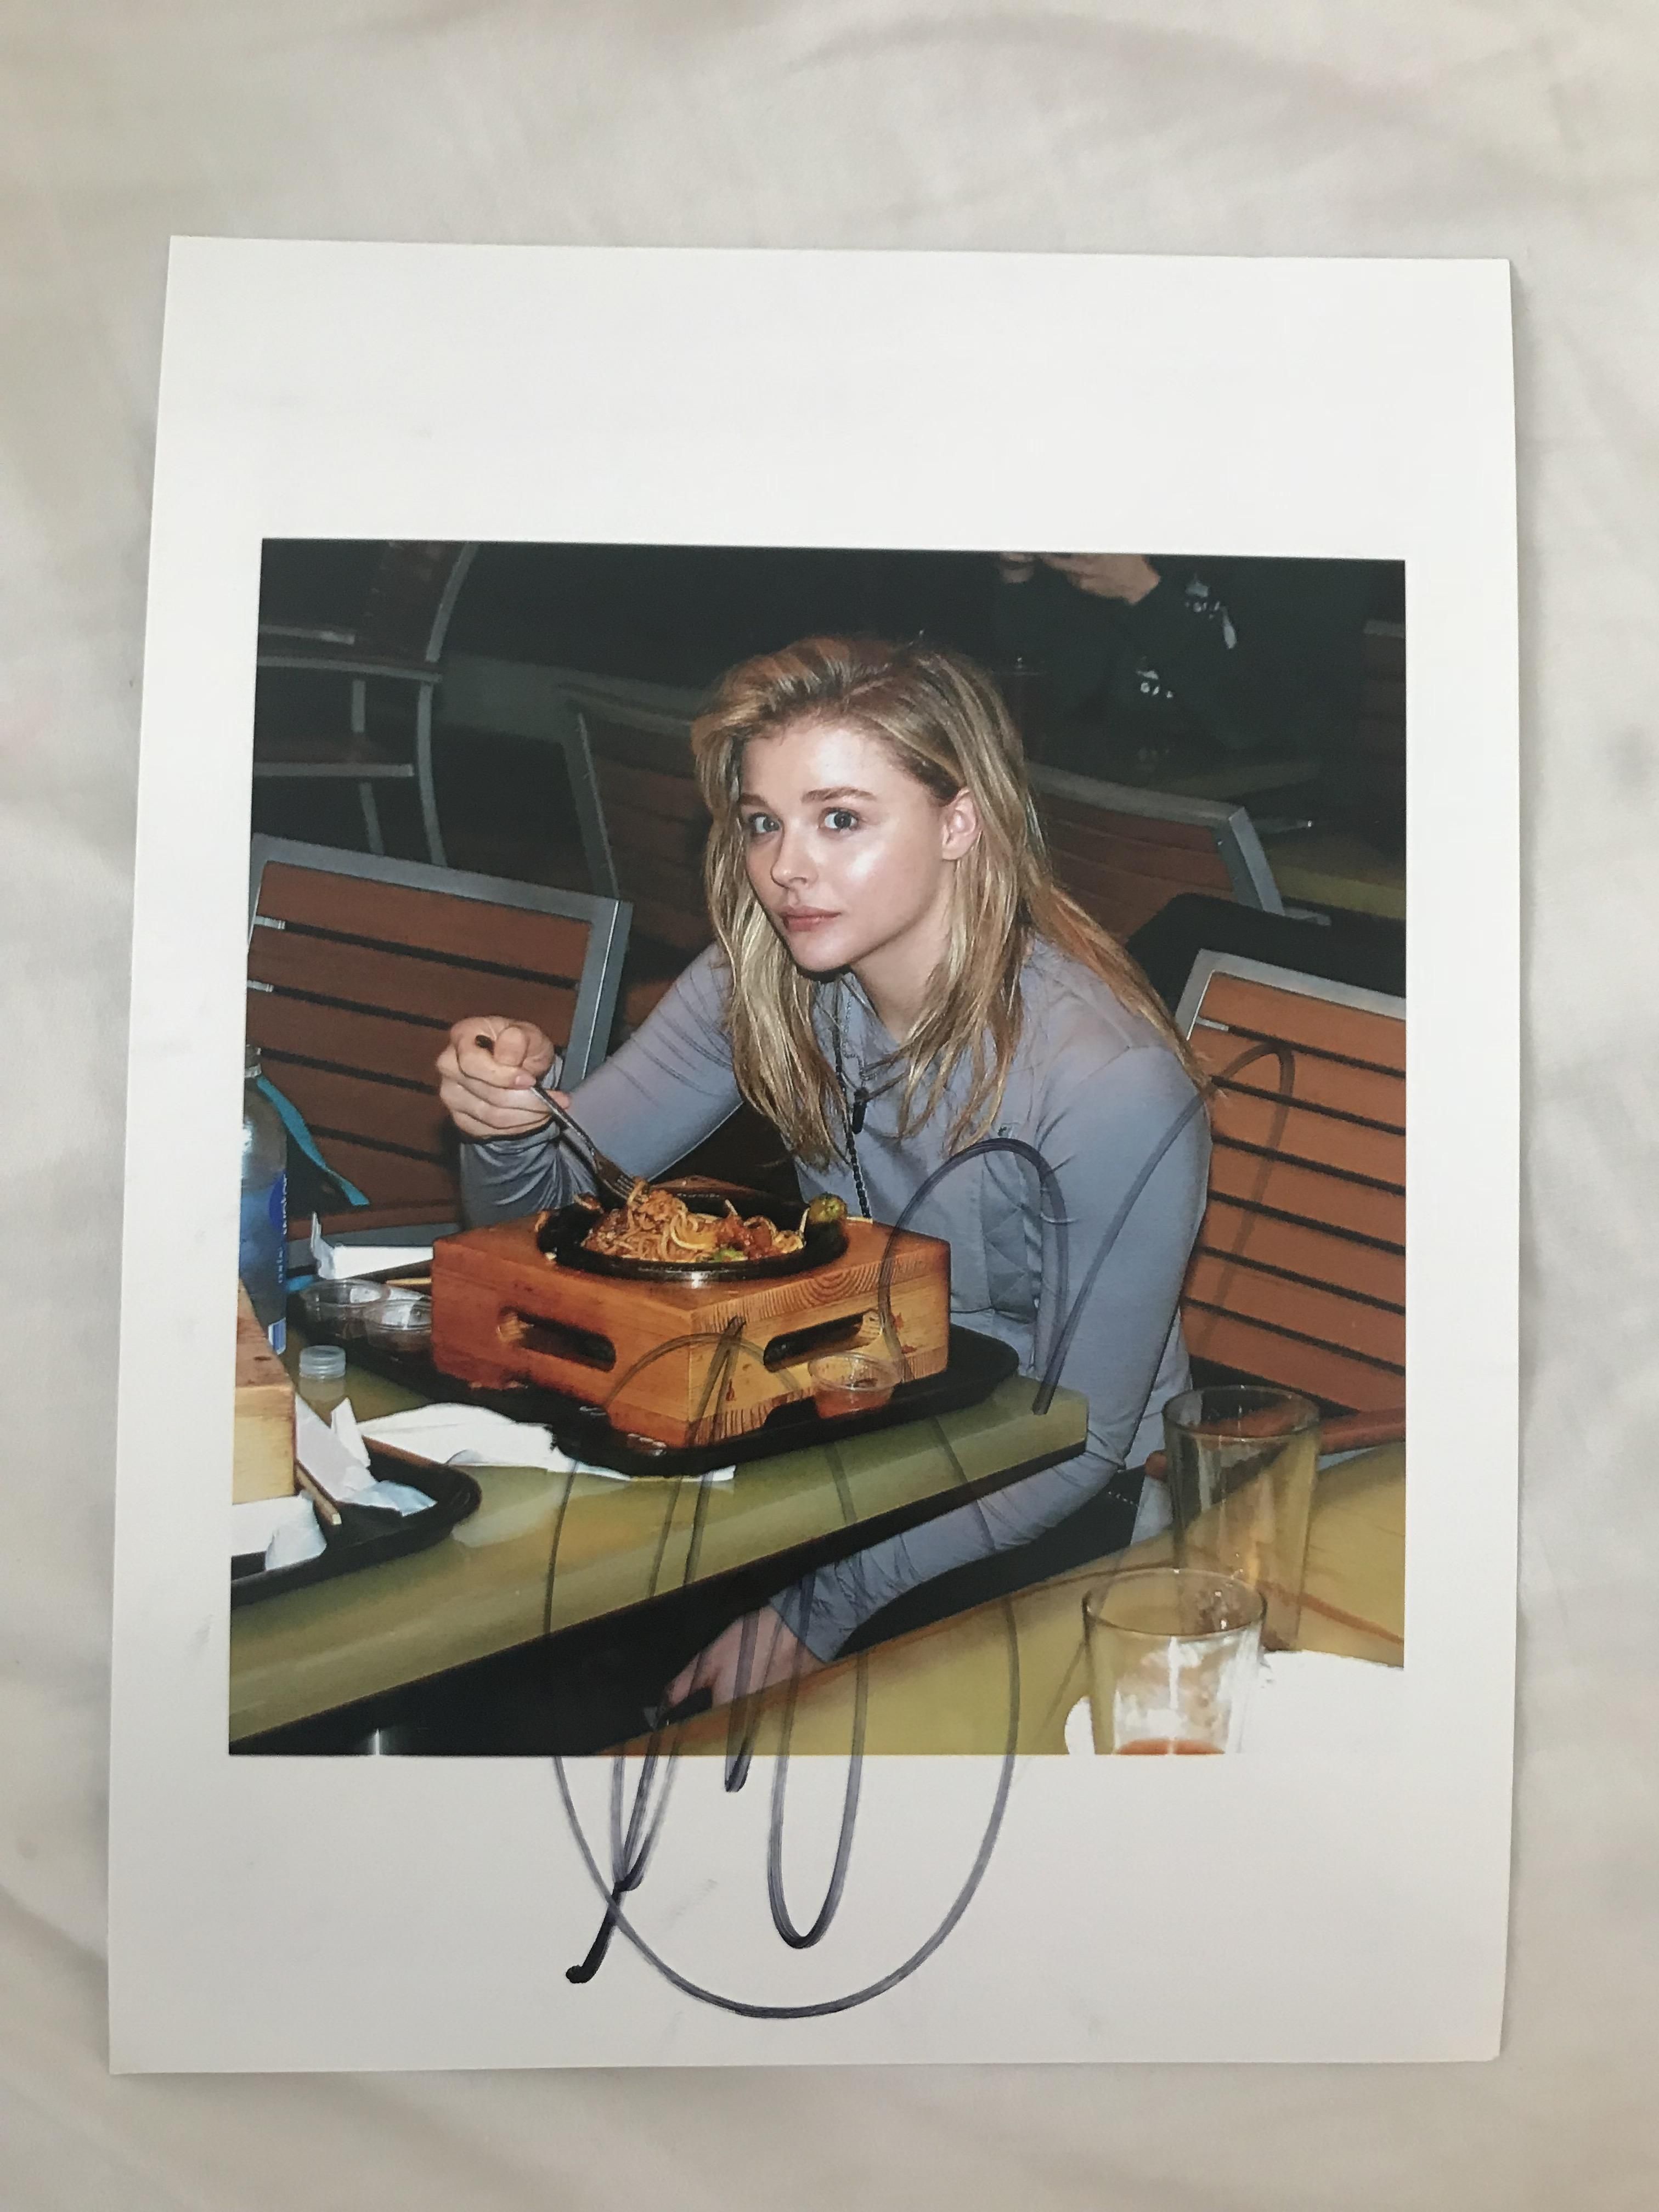 Chloe Grace Moretz came to my school last night and she signed this very candid picture I had of her. She got a good kick out of it.